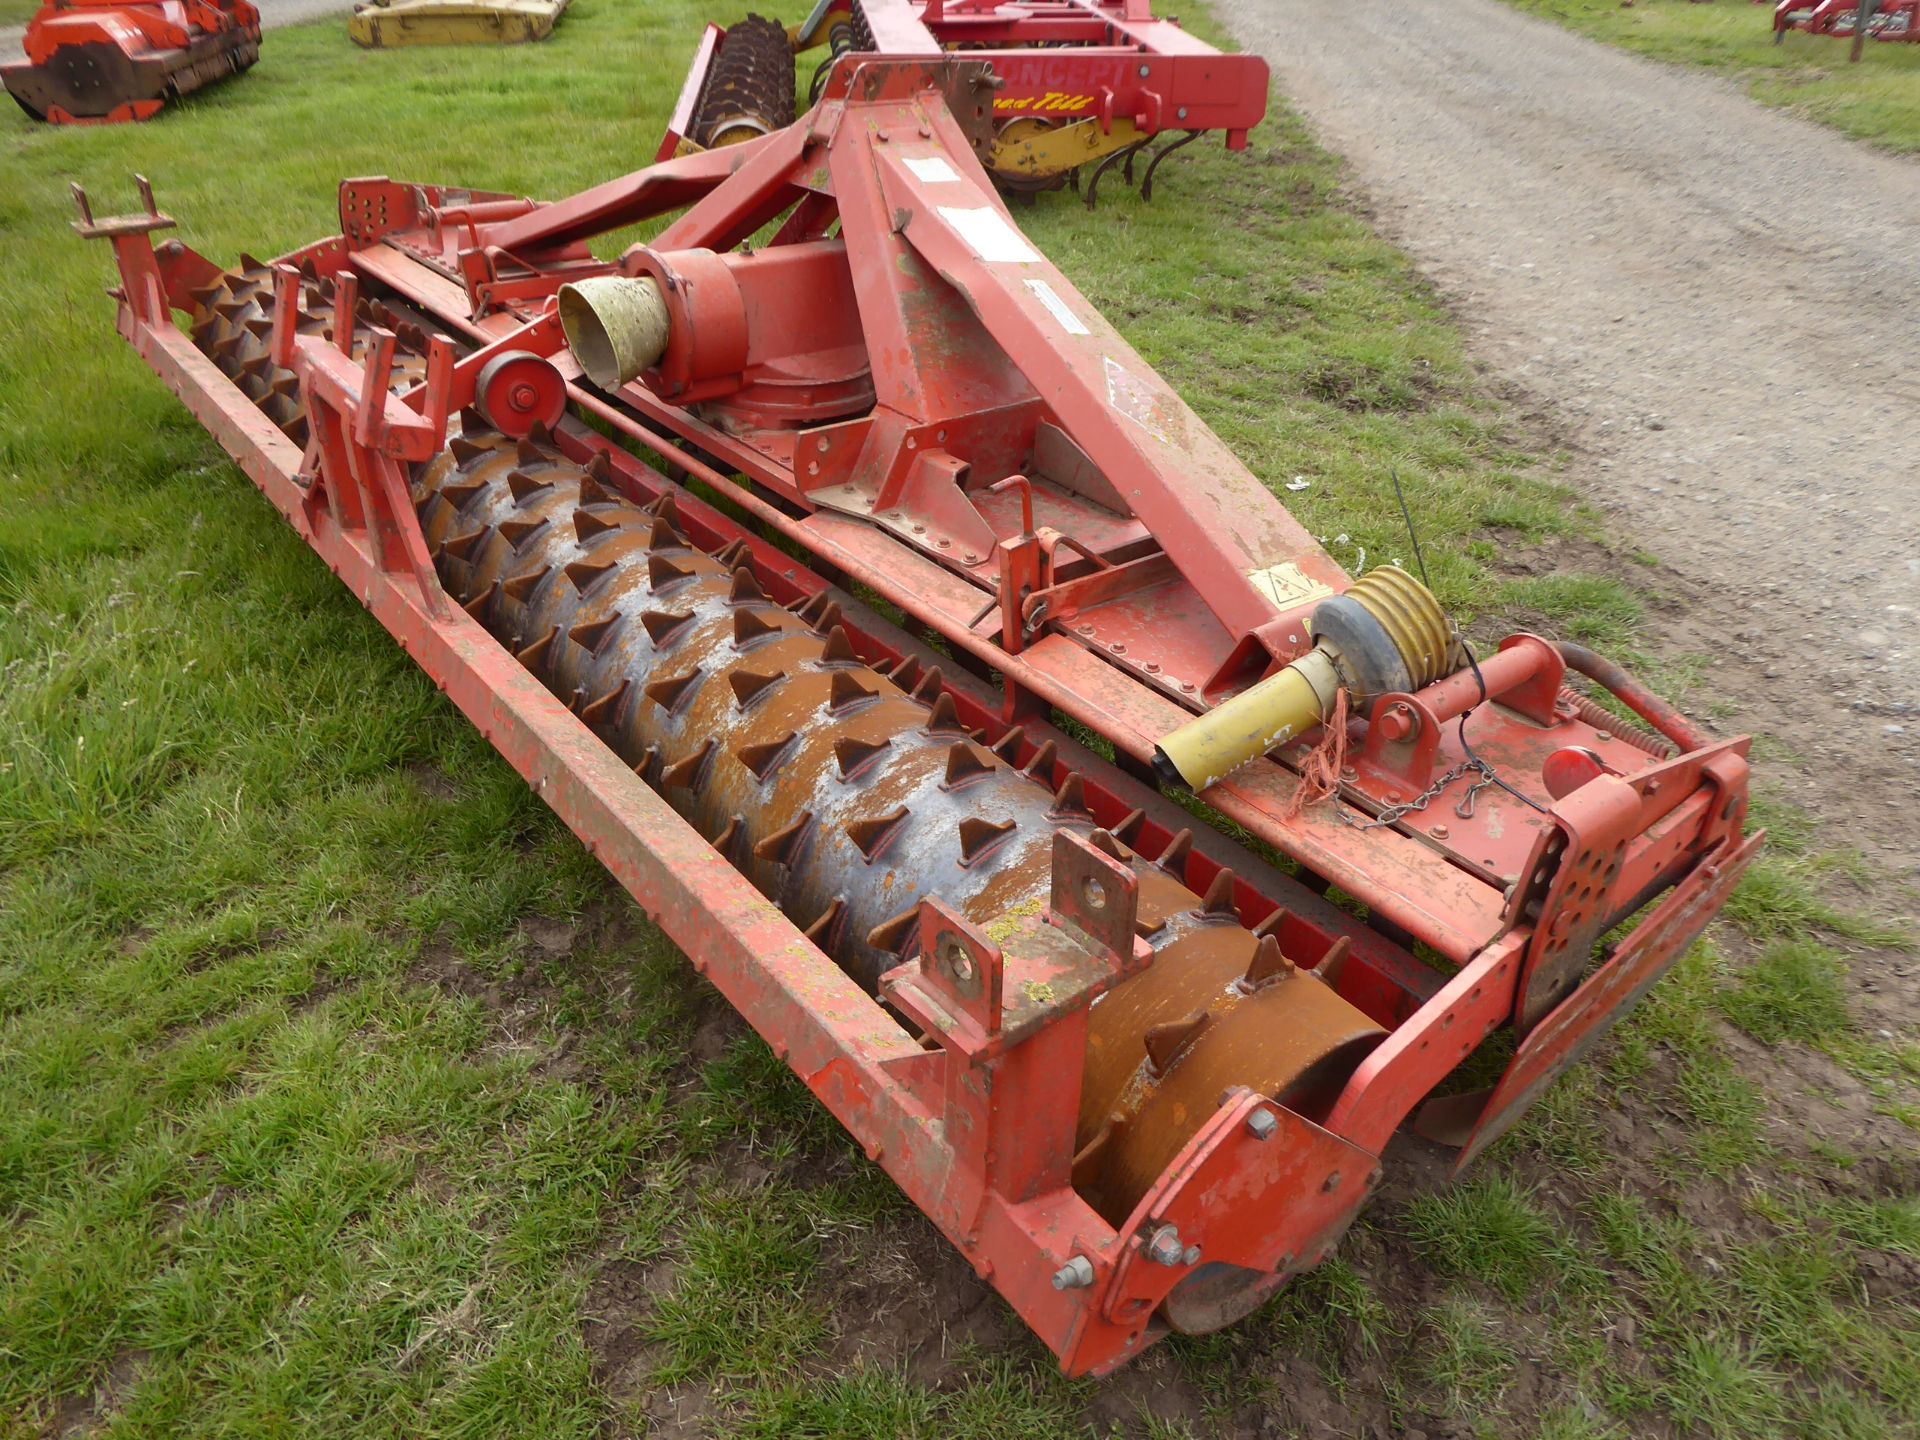 Kuhn HR 4002 4m power harrow with packer roller and 1000 PTO, practically new tines, 1" of wear - Image 3 of 4